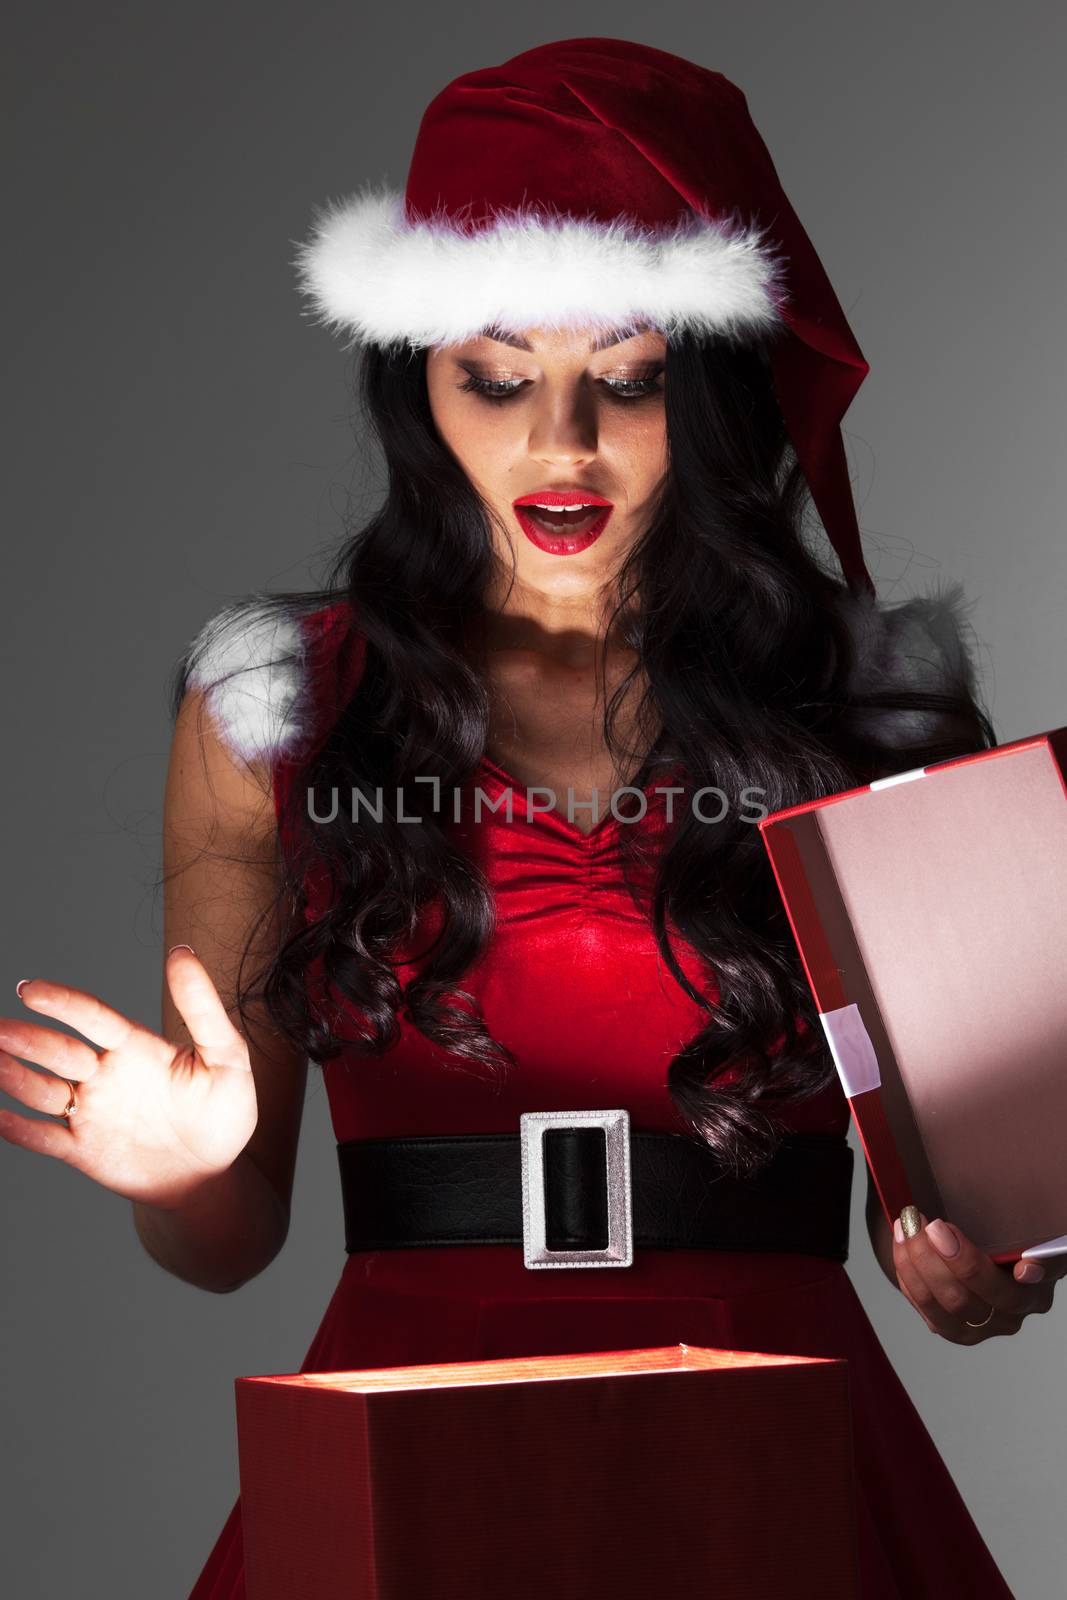 Beautiful woman in Santa Claus style costume looking into glowing Christmas gift box